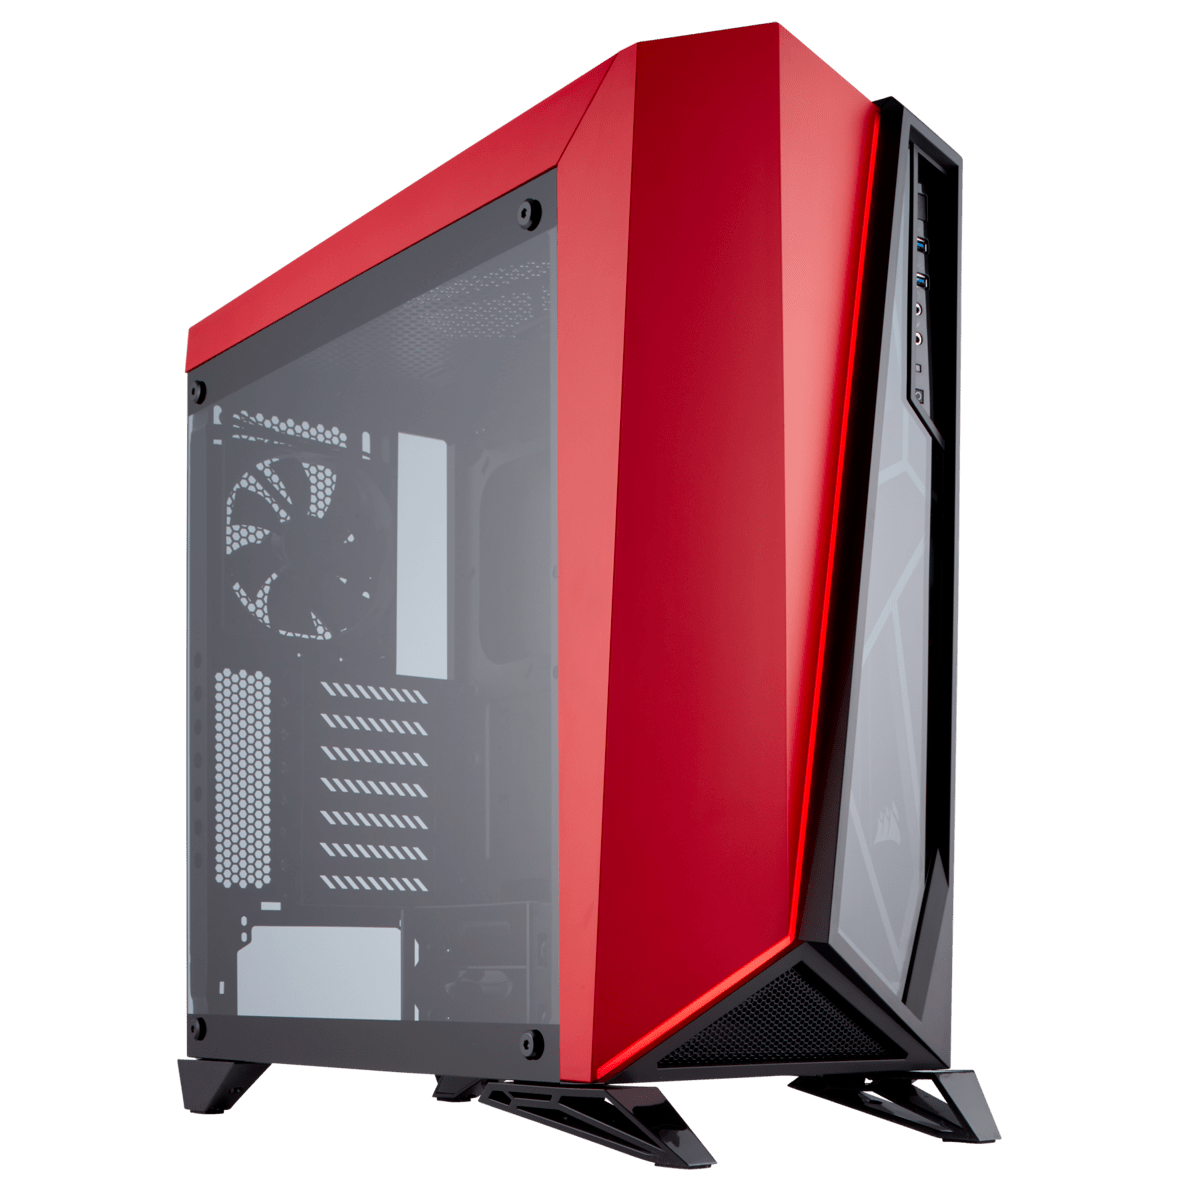 corsair carbide series spec-omega tempered glass mid-tower black/red